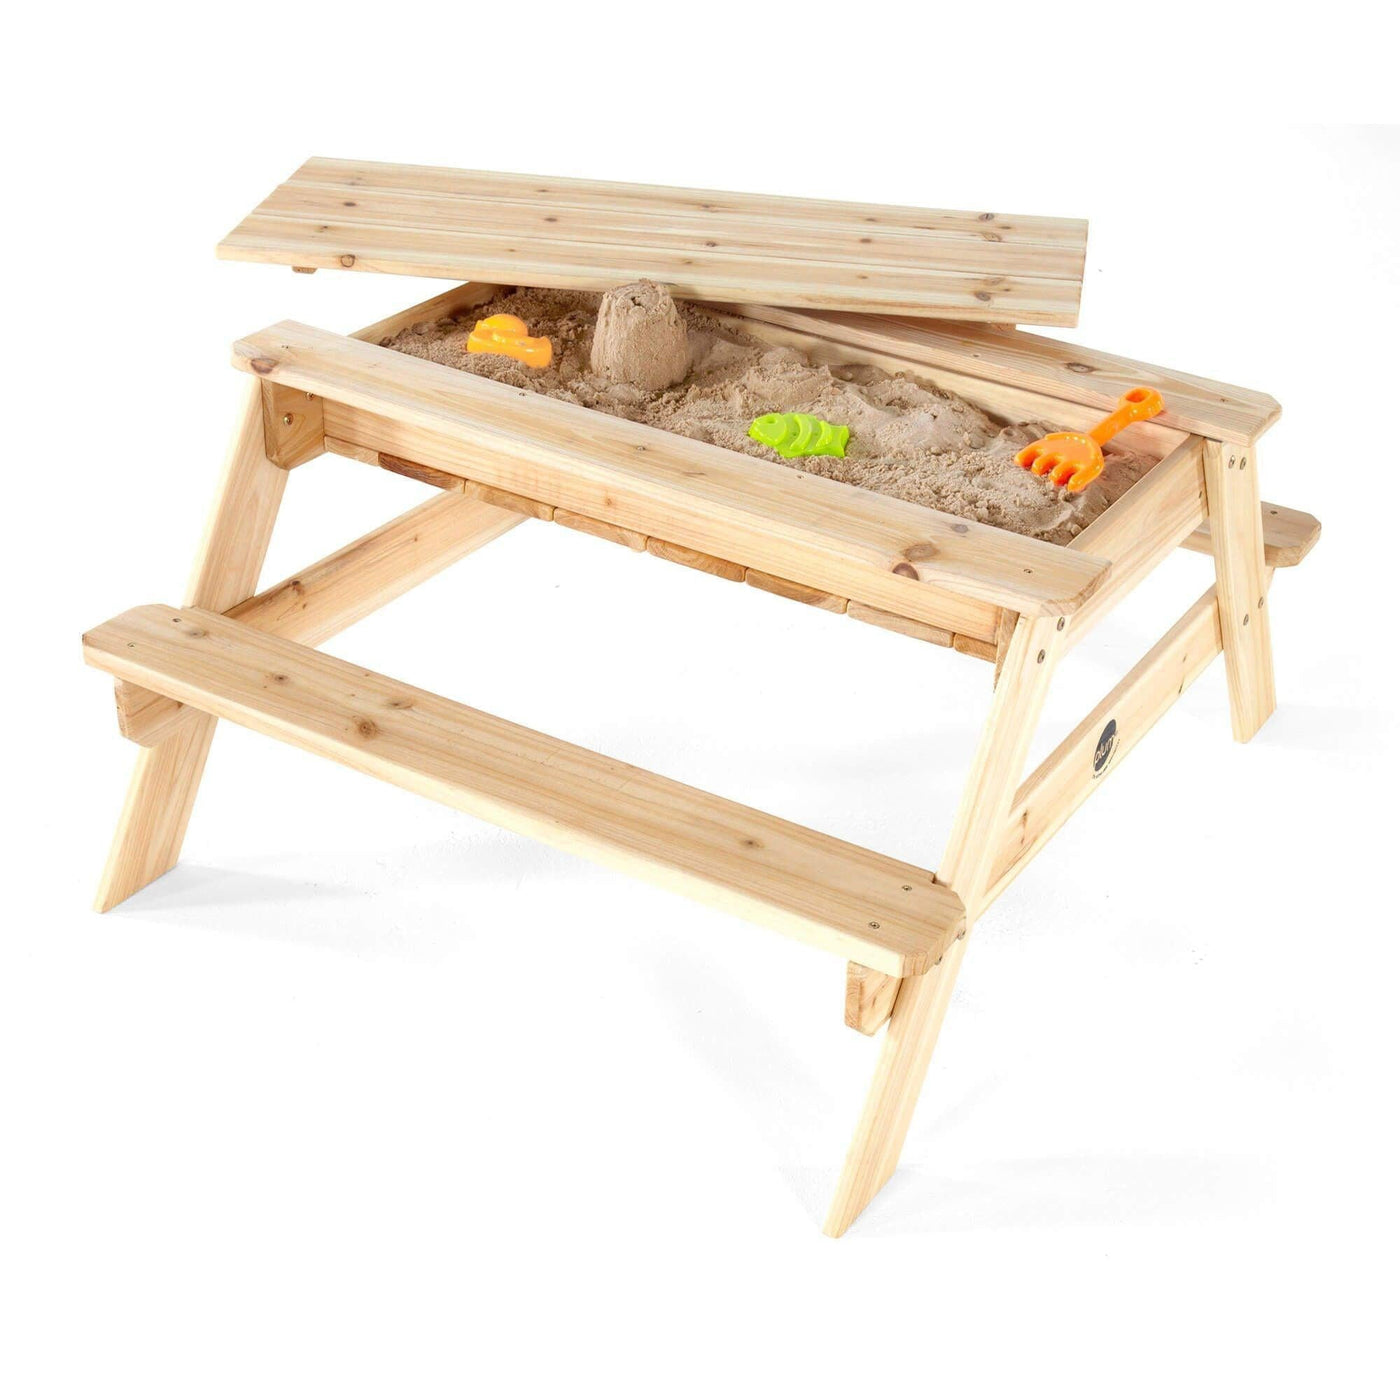 Plum Wooden Sand and Picnic Table - Natural